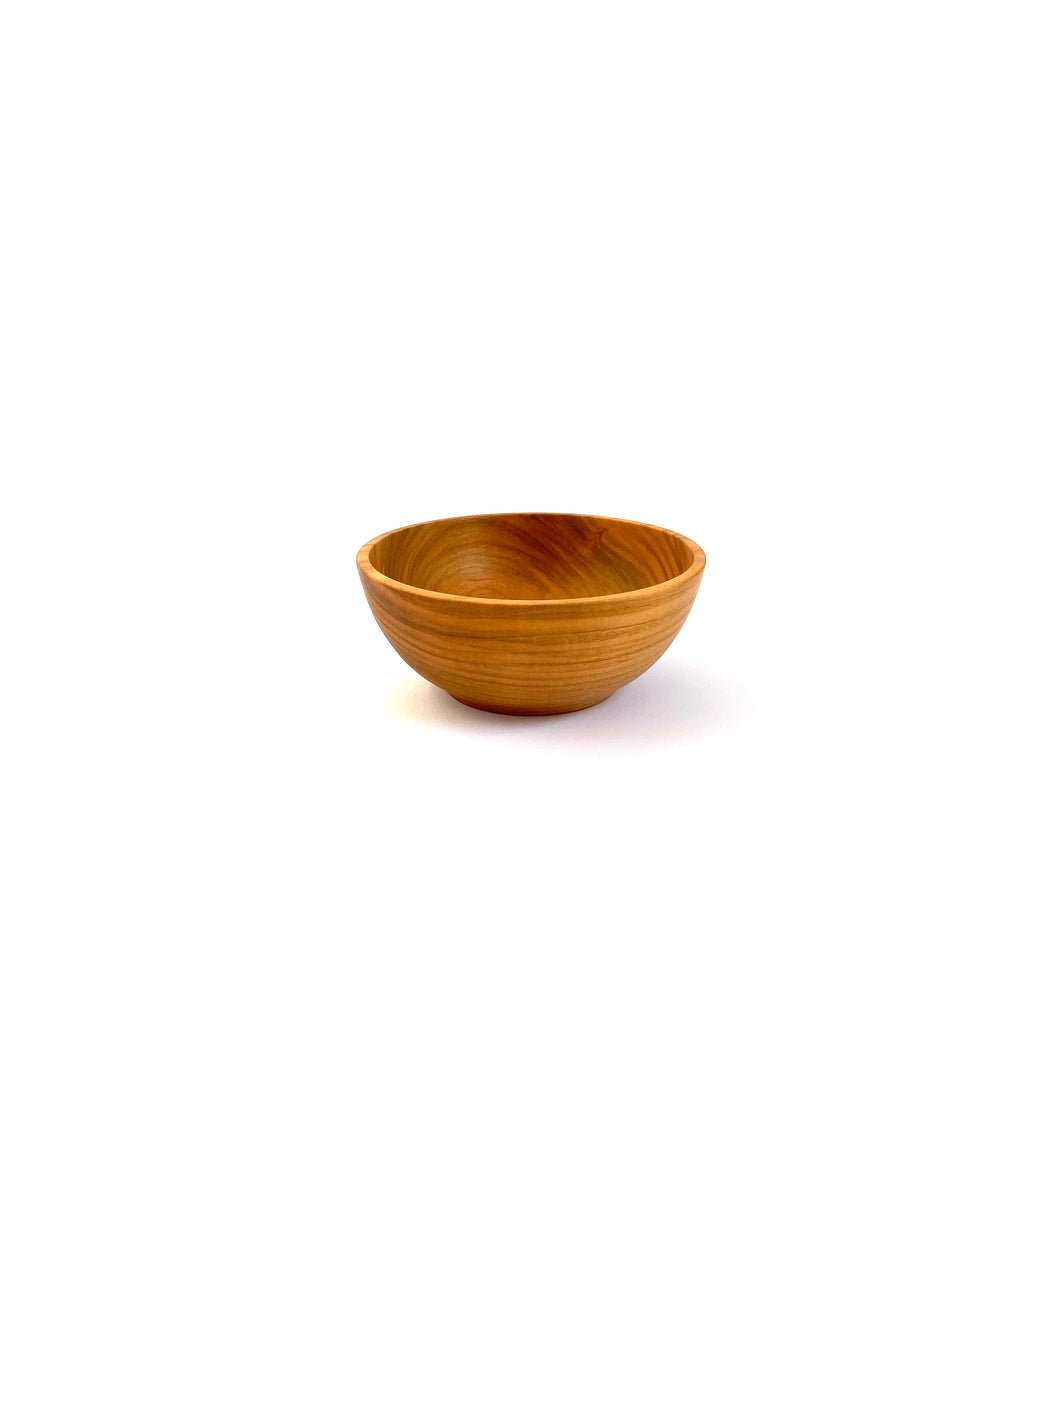 Japanese Handcrafted Wooden Baby's Bowl